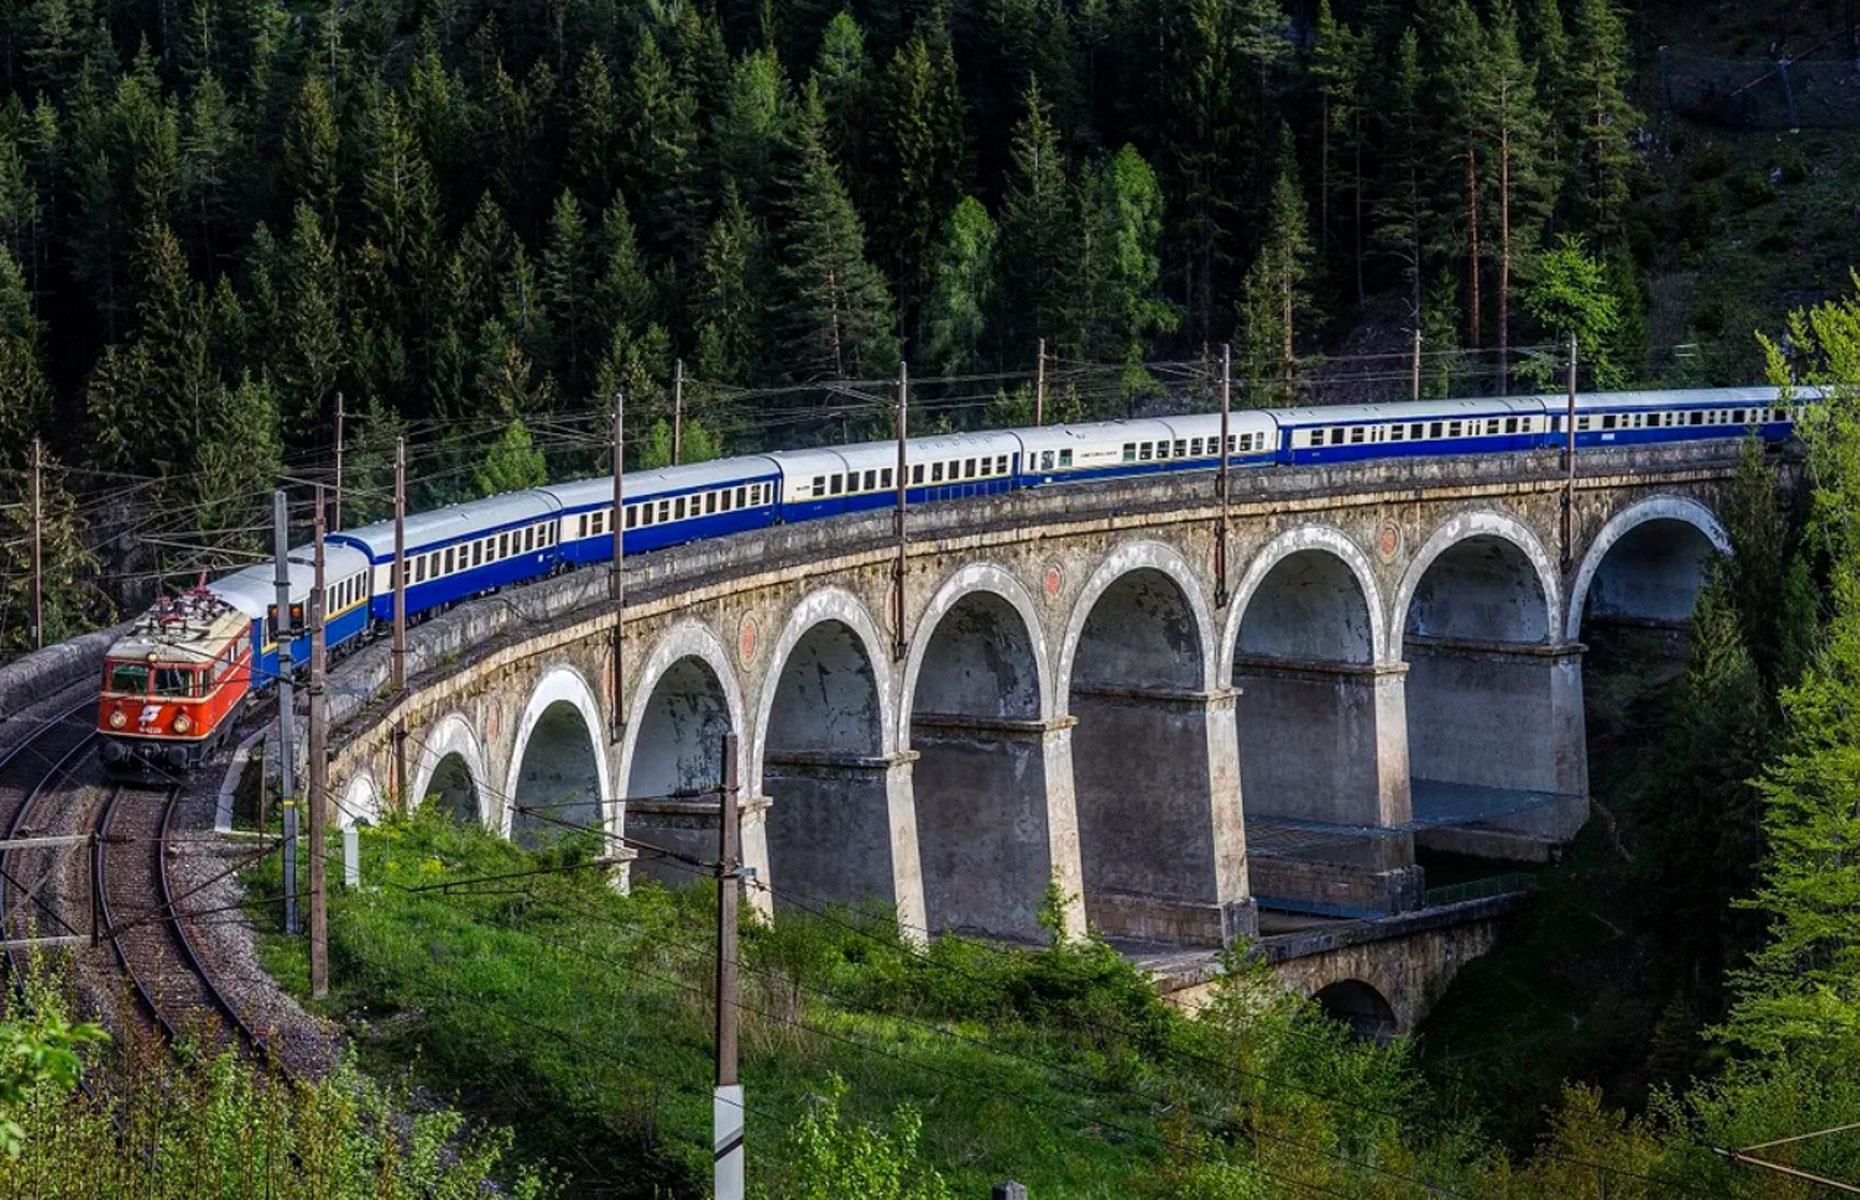 <p>Founded in 1989 by businessman Tim Littler, the UK's Golden Eagle describes itself as an operator of "the world's leading luxury private trains."</p>  <p>The firm has indefinitely suspended its best-known service, the <em>Trans-Siberian Express</em>, due to Russia's invasion of Ukraine. However, it has managed to pivot its business to its Central and Southern Asian and European offerings. These include the <em>Danube Express</em>, which the company acquired in 2015.</p>